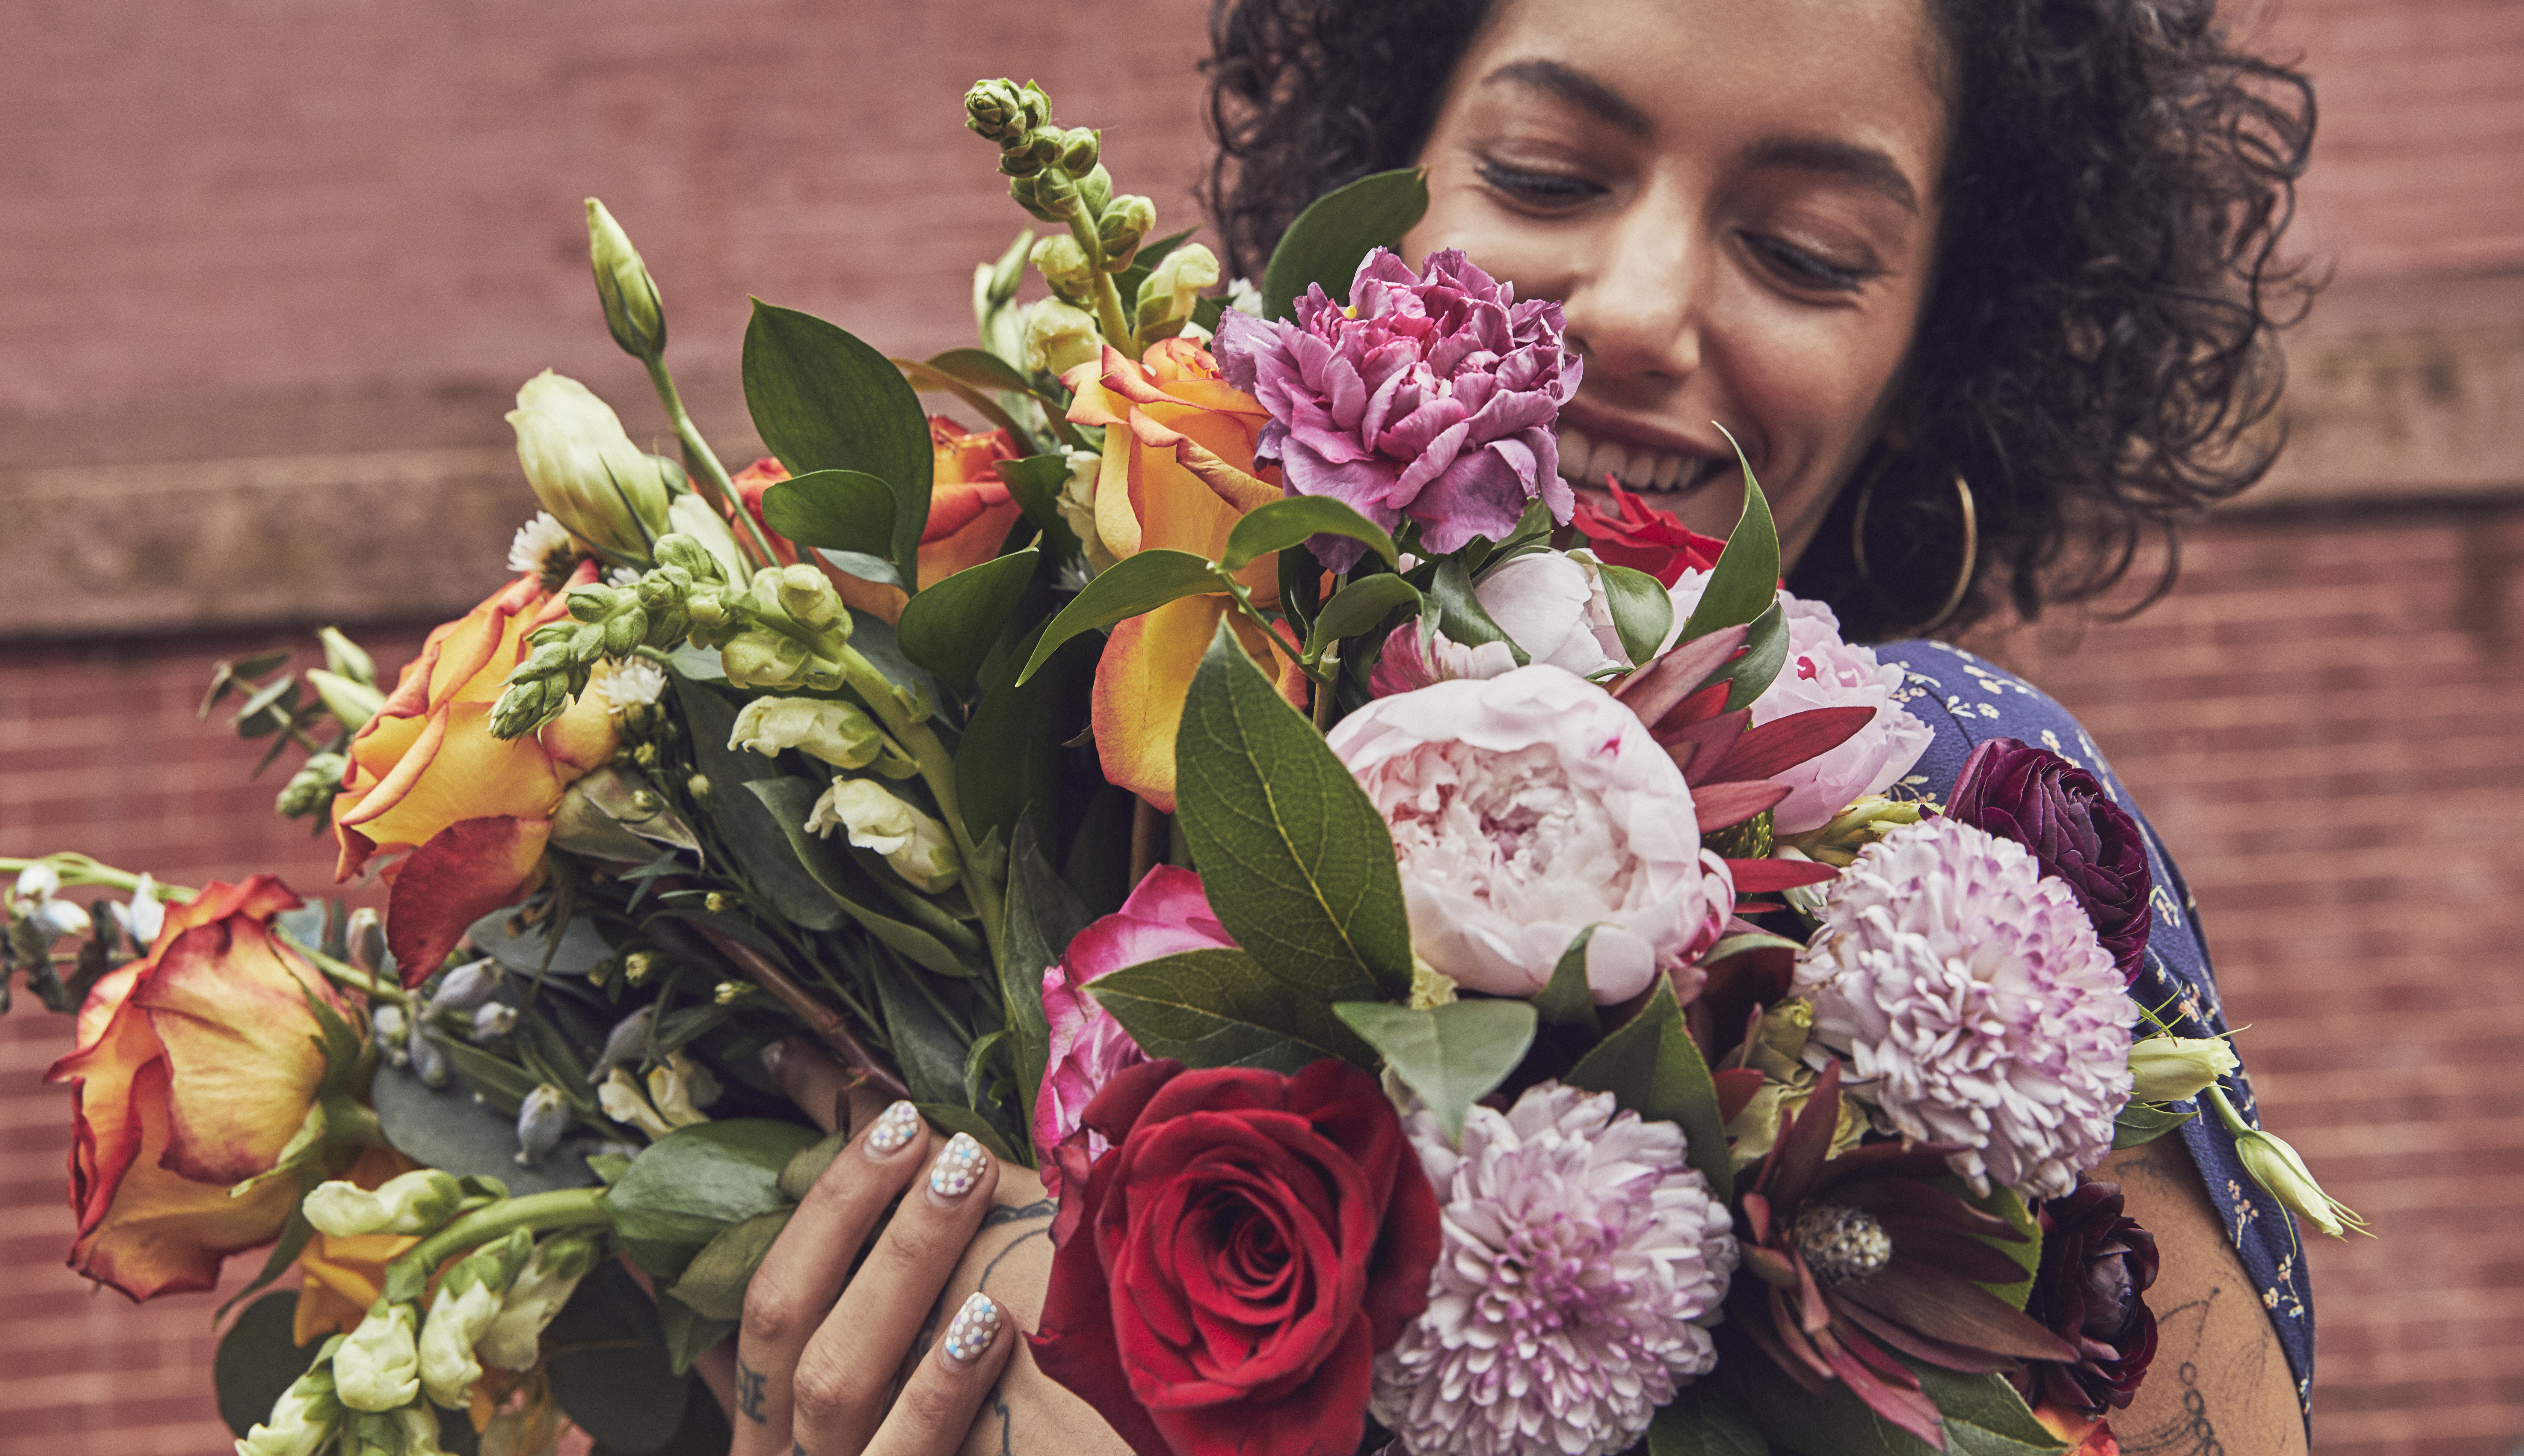 Woman holding an armful of floral bouquets